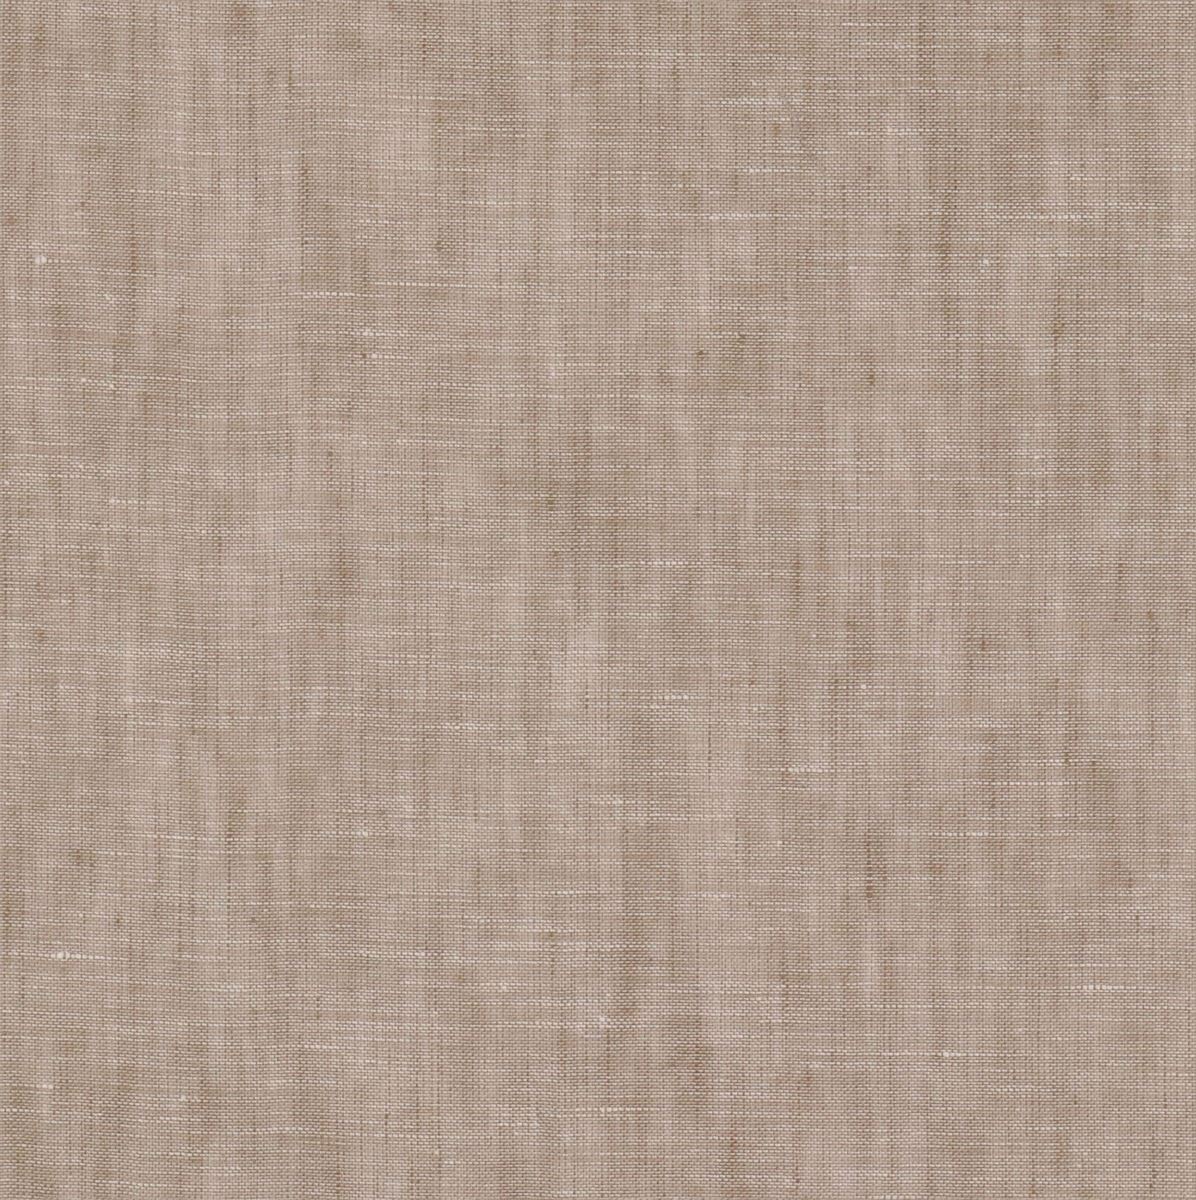 Day curtain taupe Erin